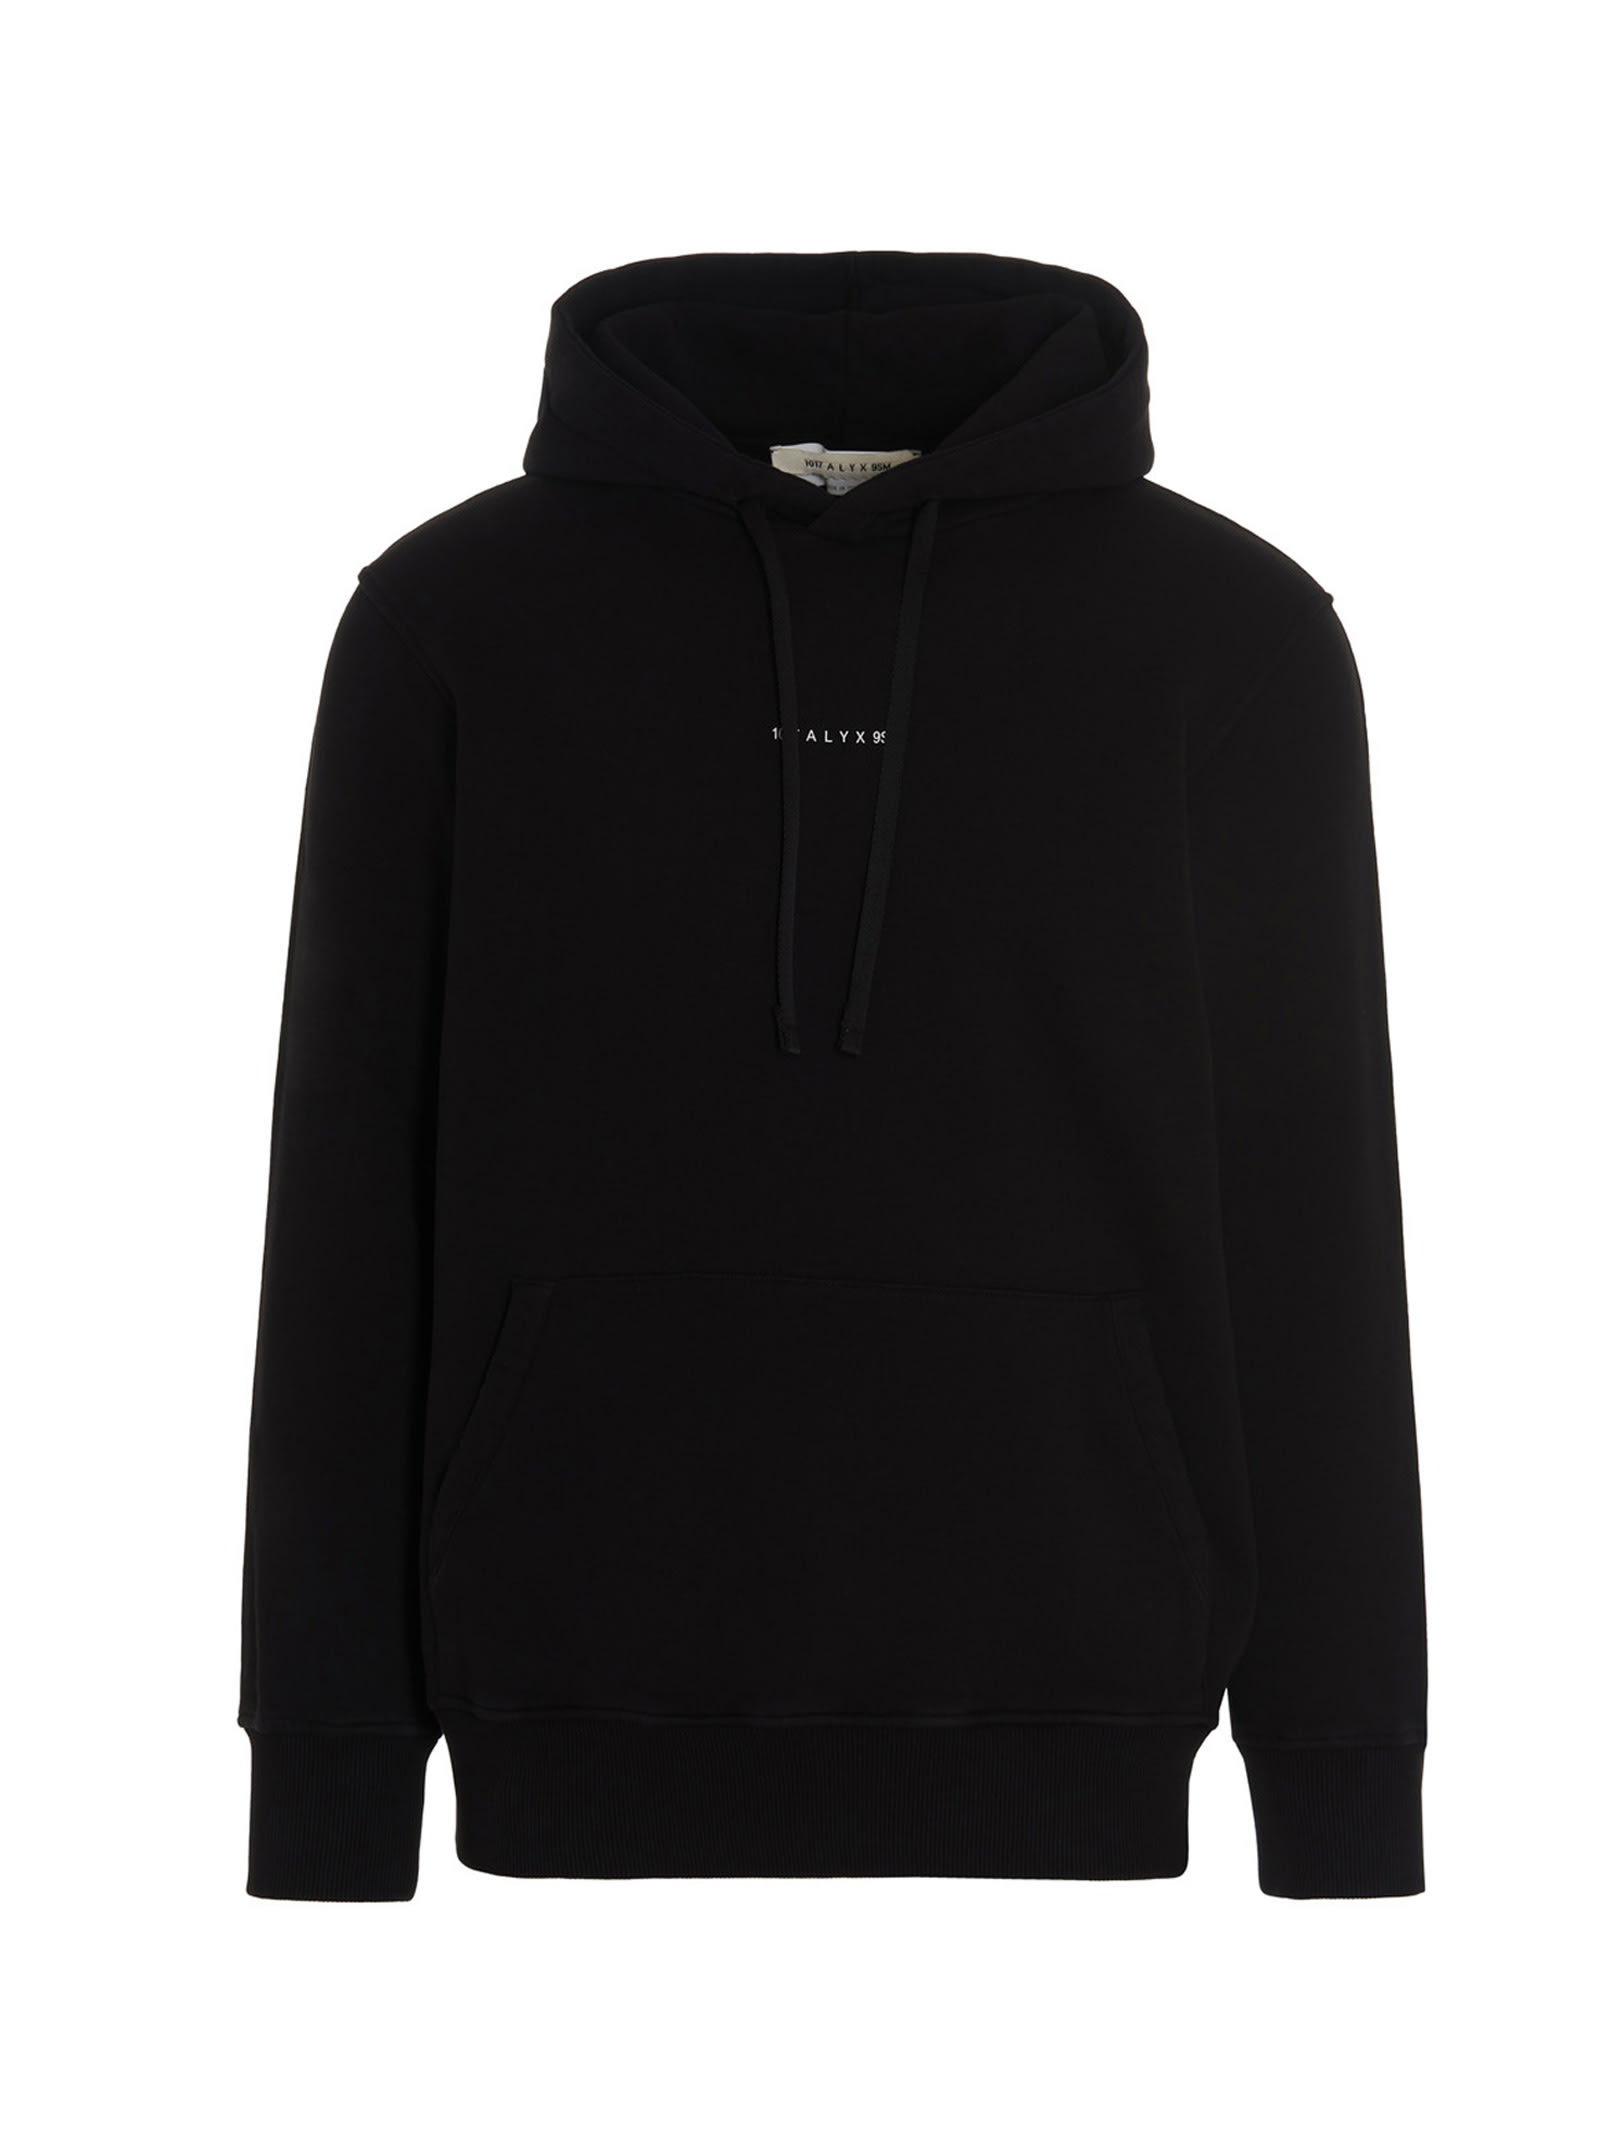 1017 Alyx 9sm collection Logo Hoodie